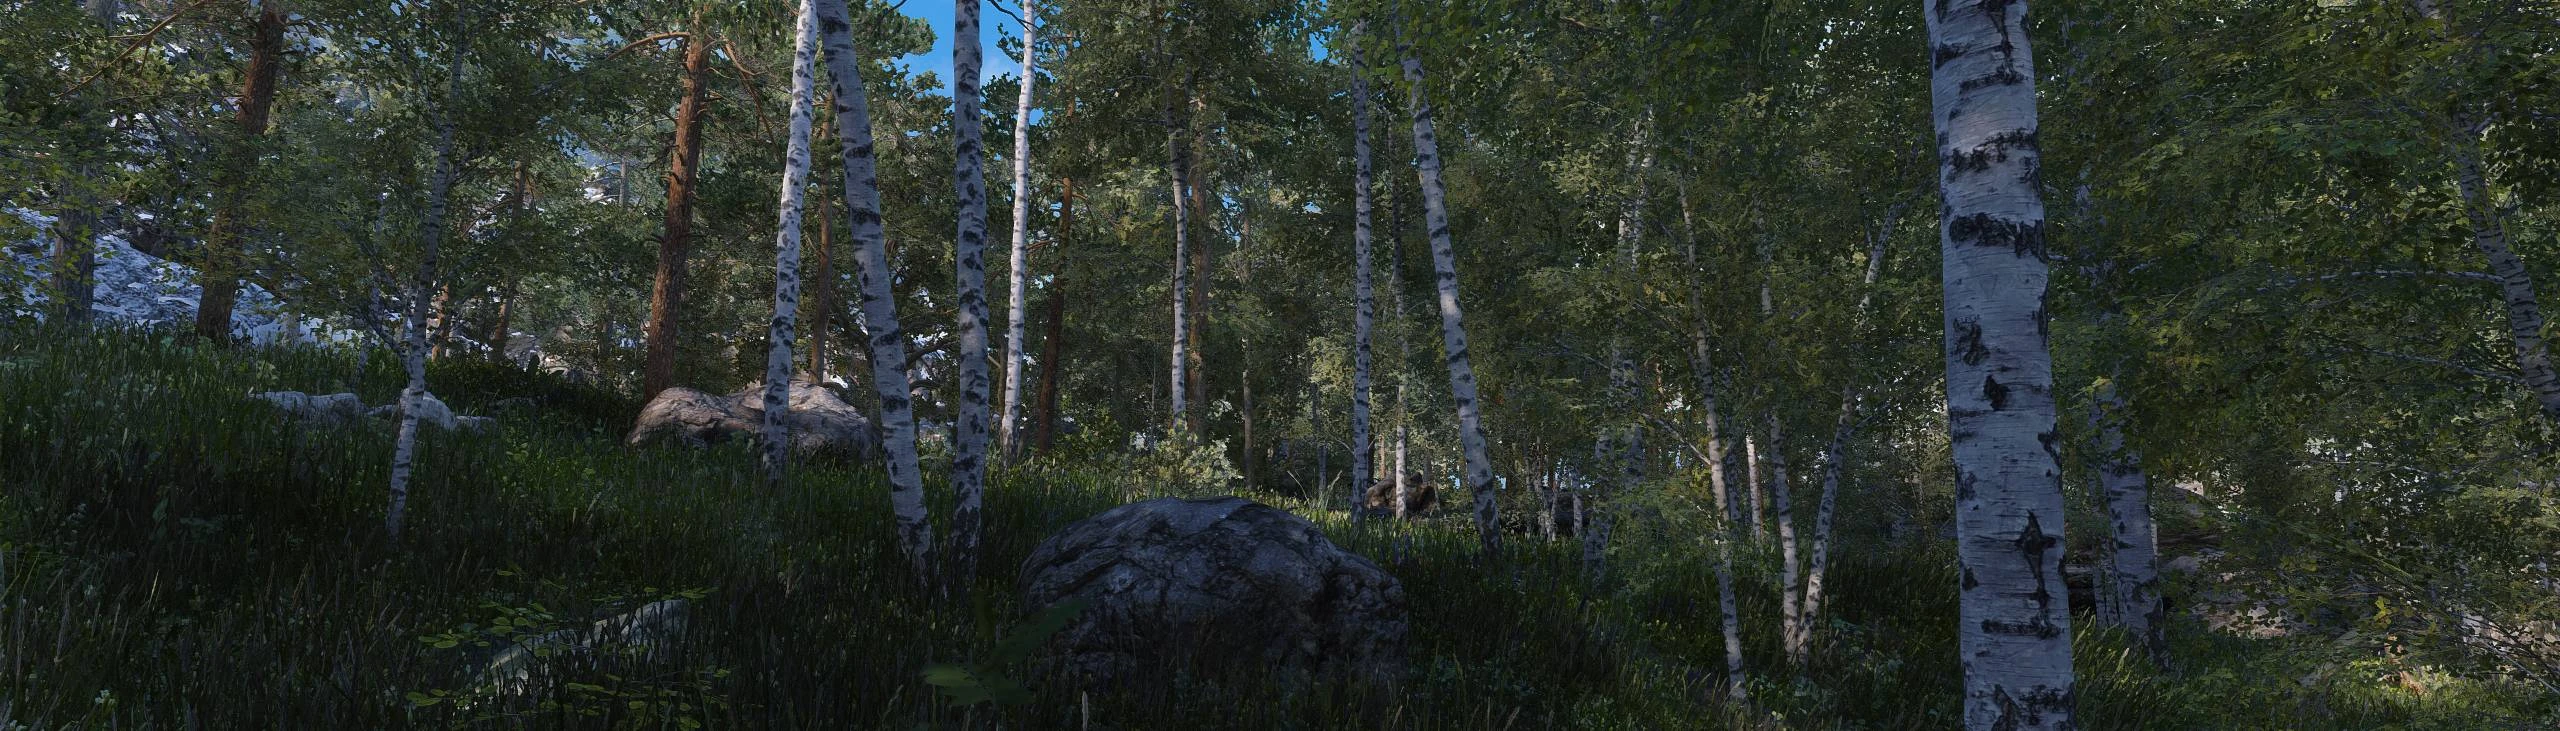 The Forest Free Download (v1.12) - Nexus-Games